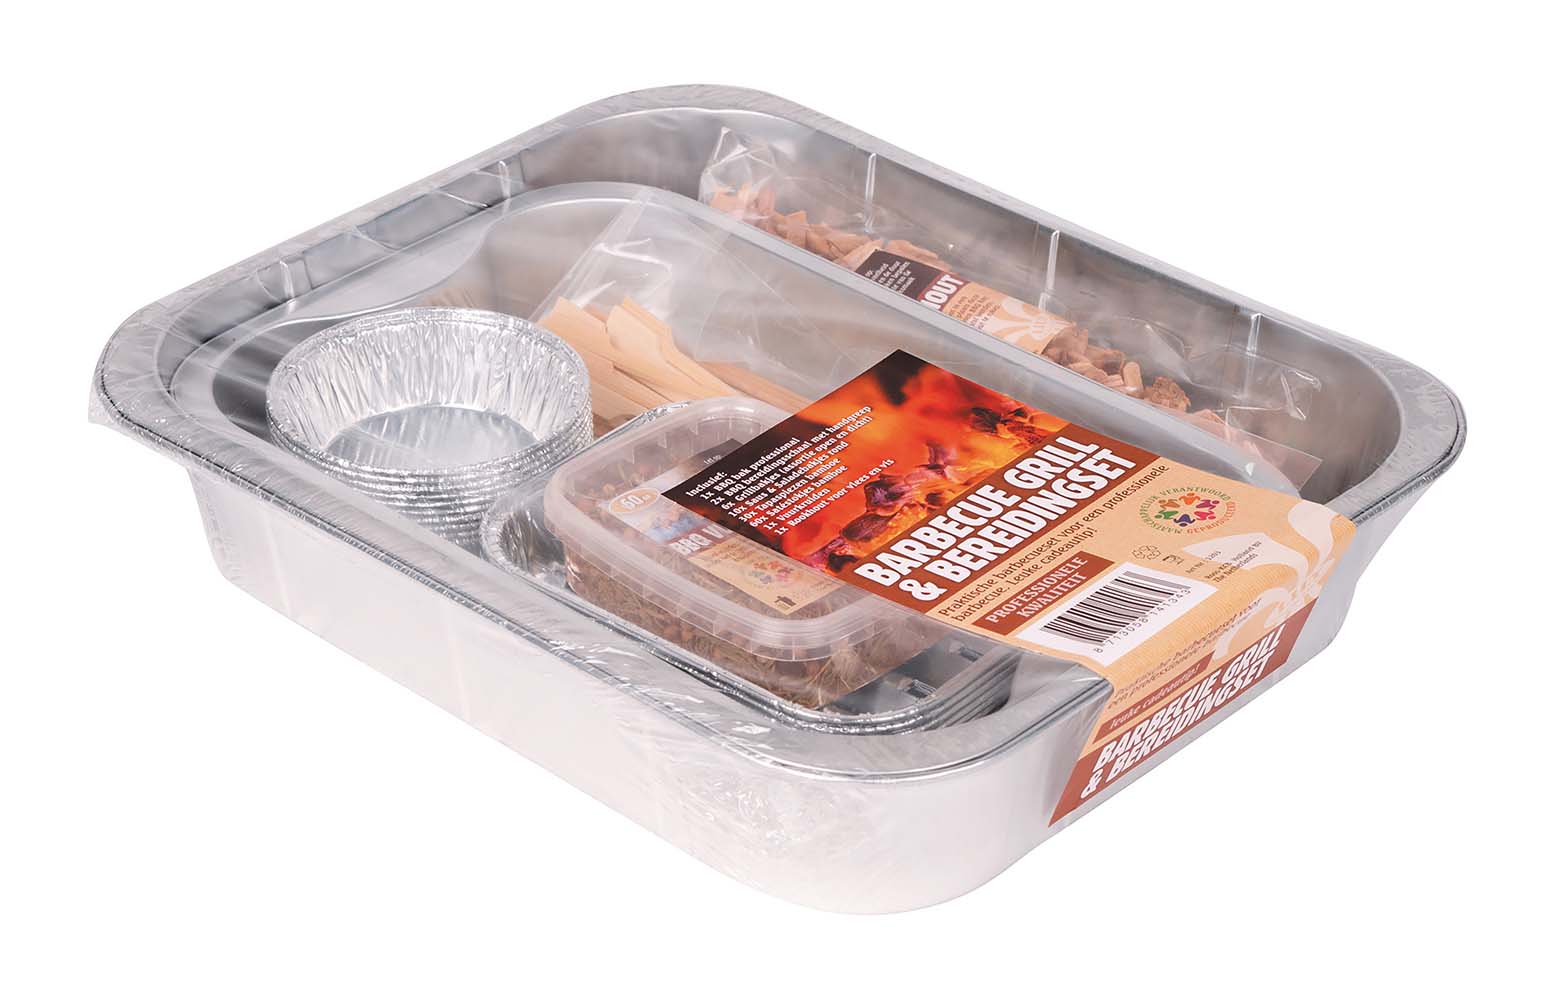 8107907 Professional preparation set for the barbecue. Includes 4 different sizes of grill dishes/trays (9 dishes/trays), 10 sauce & salad trays, 30 tapas bamboo skewers, 60 bamboo satay sticks, 1 box of barbecue herbs and a bag of smoker chips. Makes a great gift!